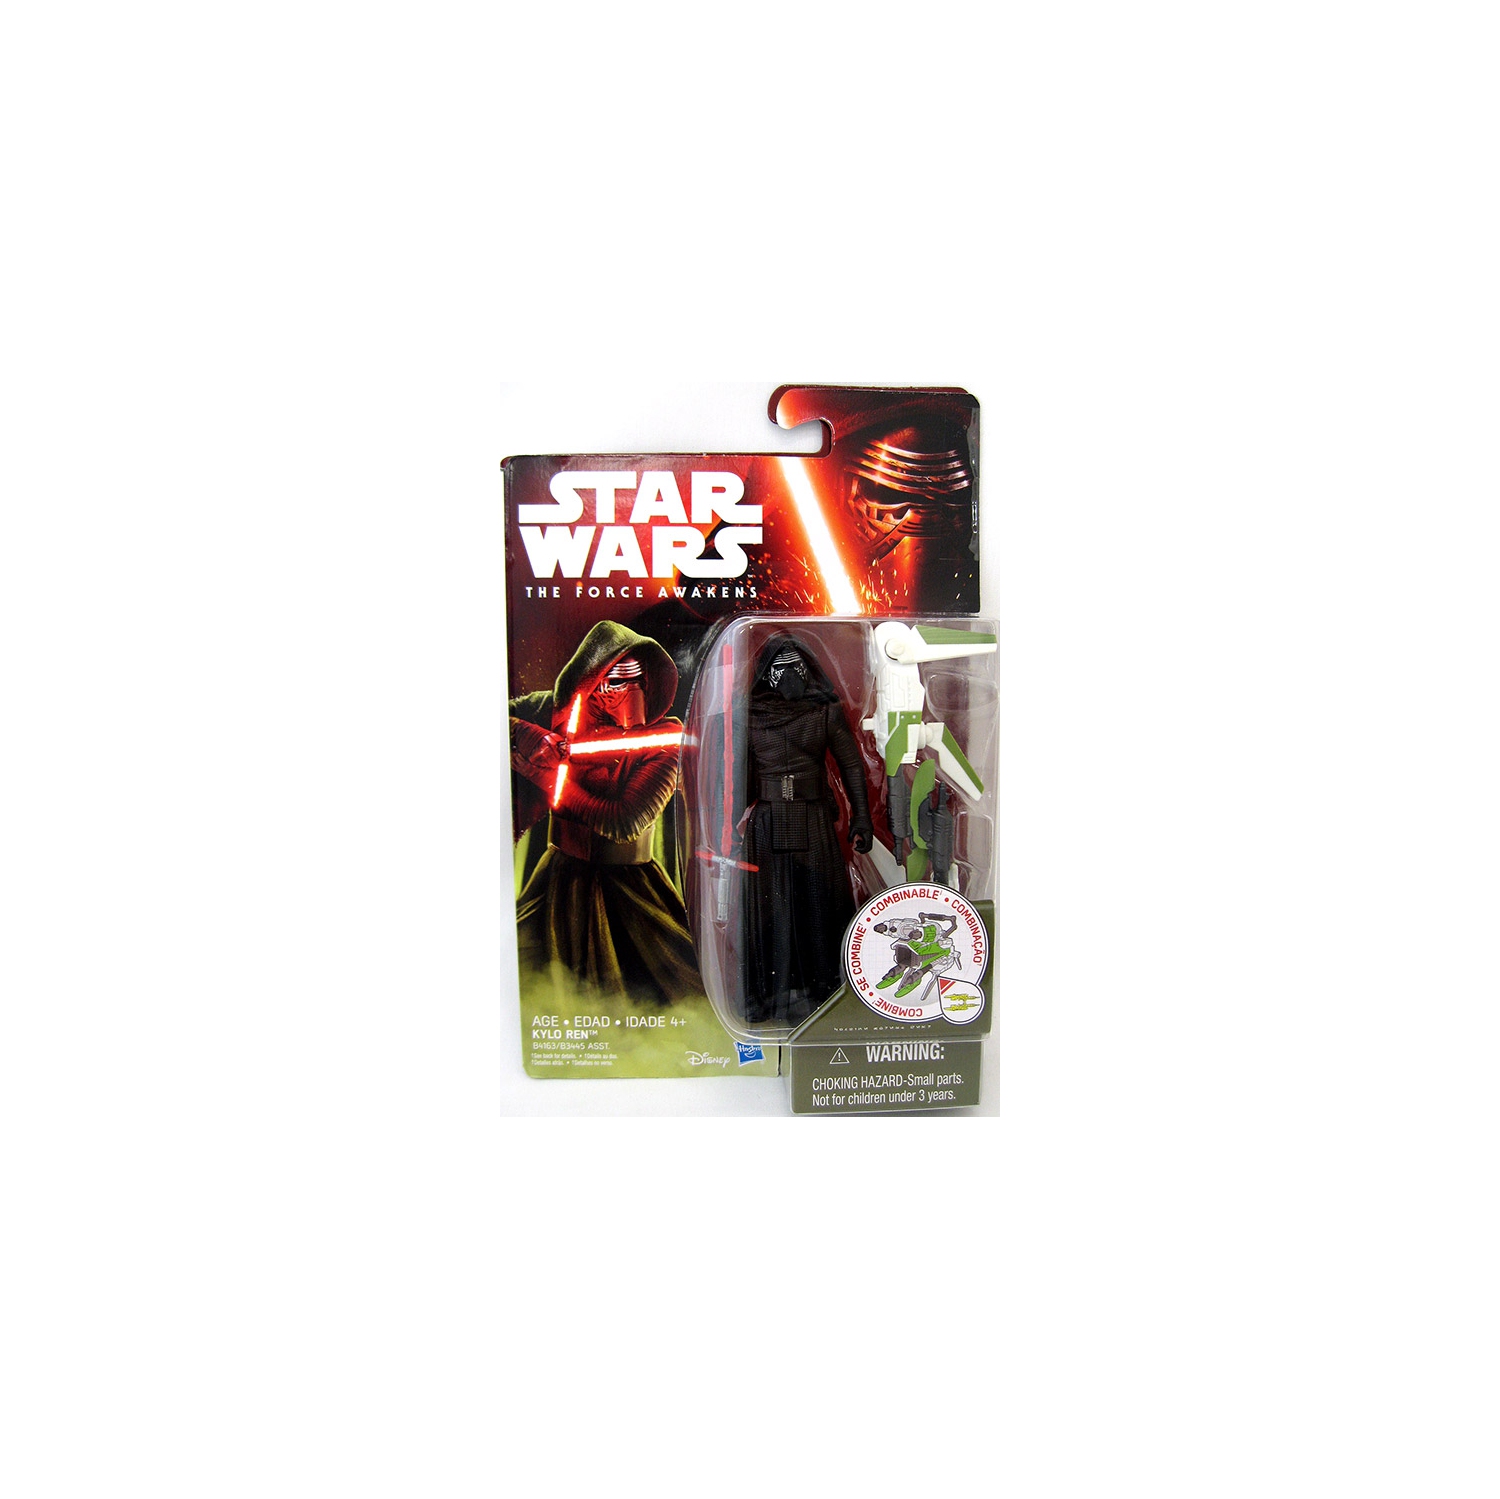 Star Wars The Force Awakens 3.75 Inch Action Figure Jungle And Space Wave 2 - Kylo Ren (Winged Pikes) (Shelf Wear)